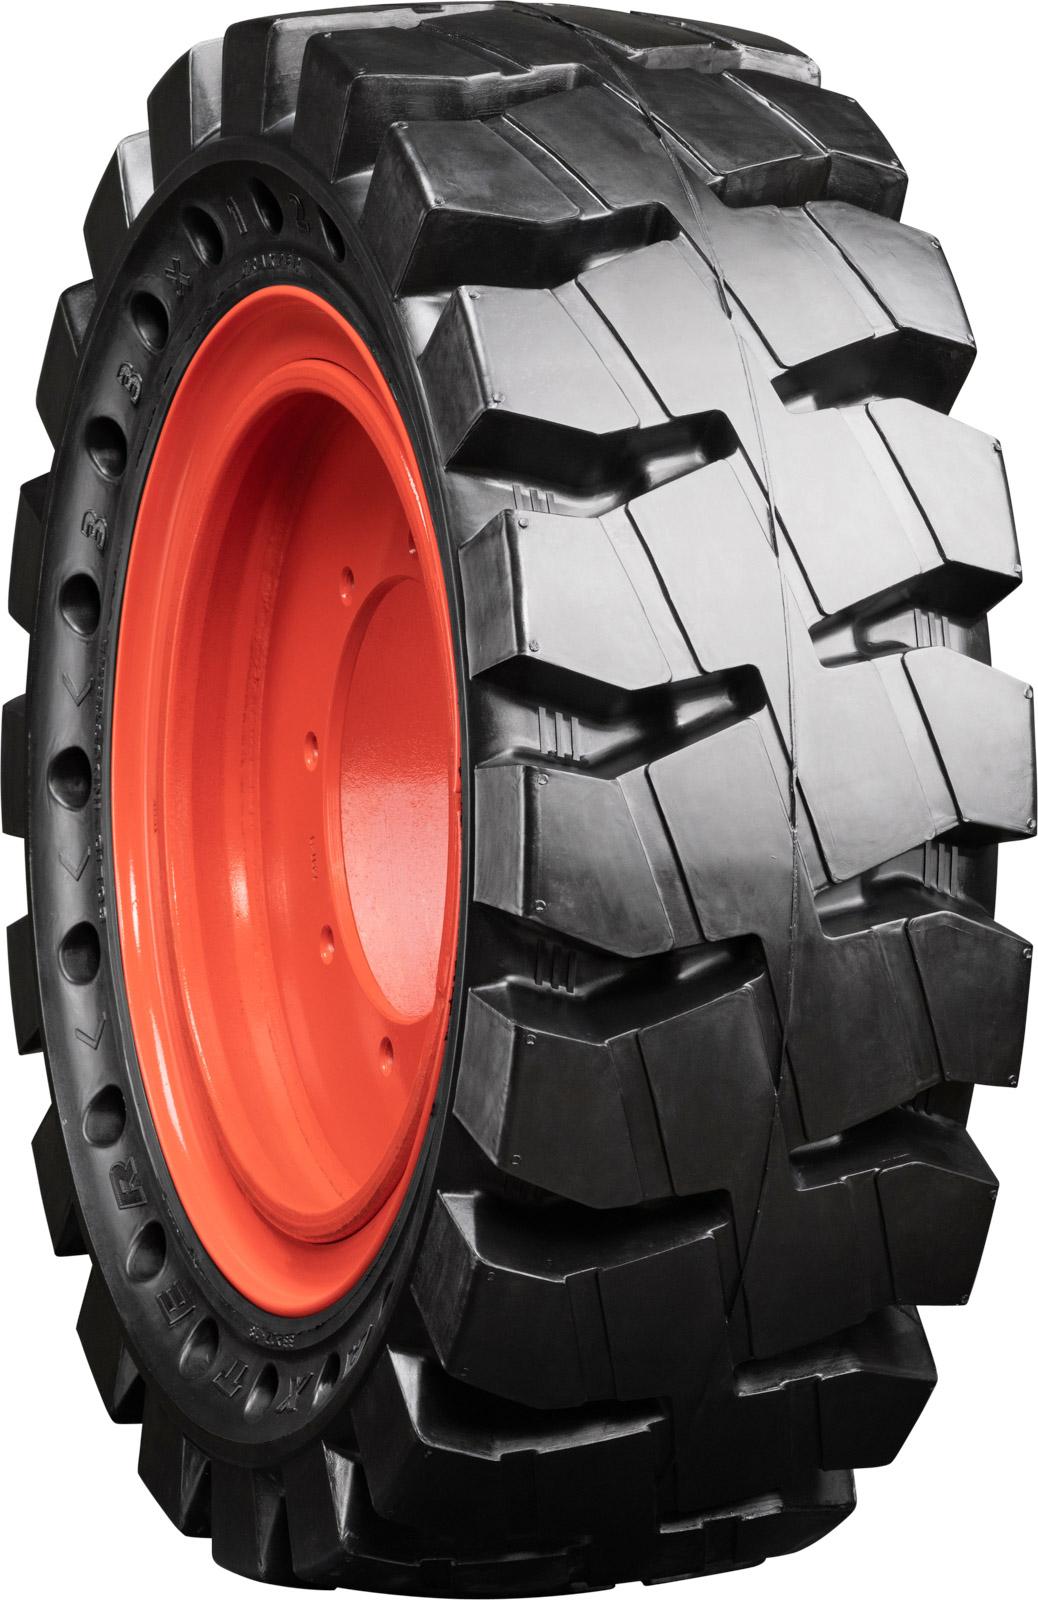 set of 4 traxter 33x12-18 (12-16.5) extreme duty non-directional solid rubber skid steer tires - 8x10.75 bolt rim